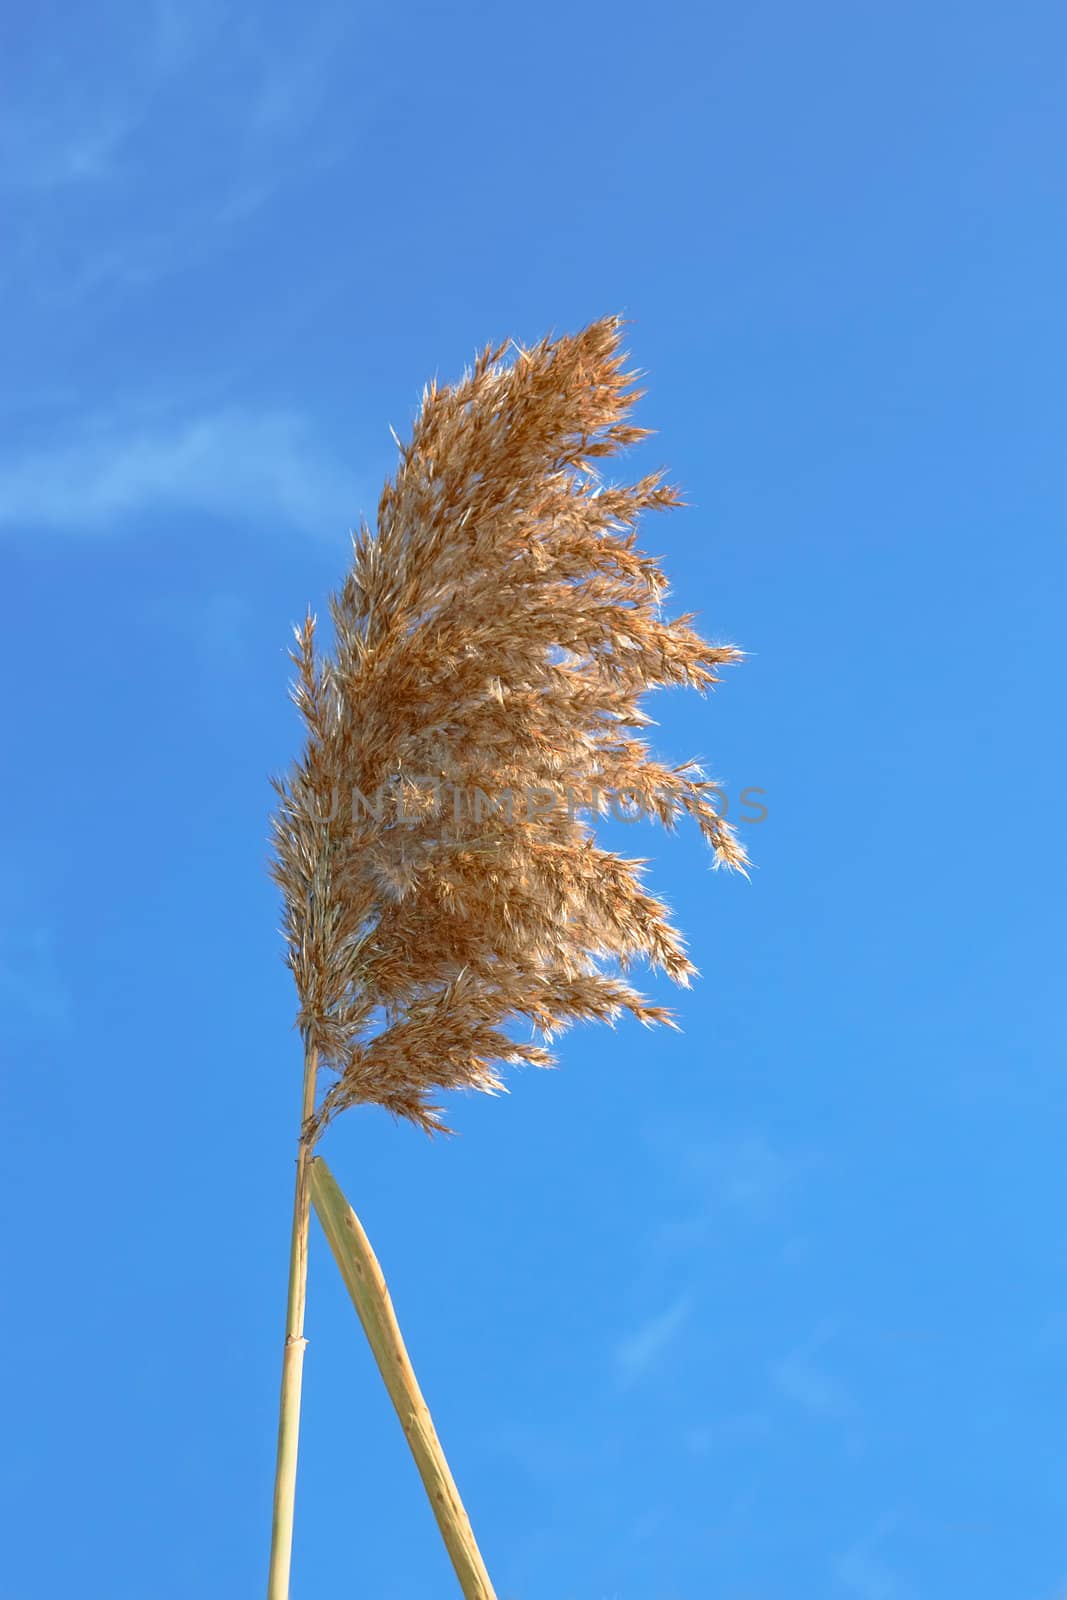 Dried reed inflorescence in autumn against blue sky